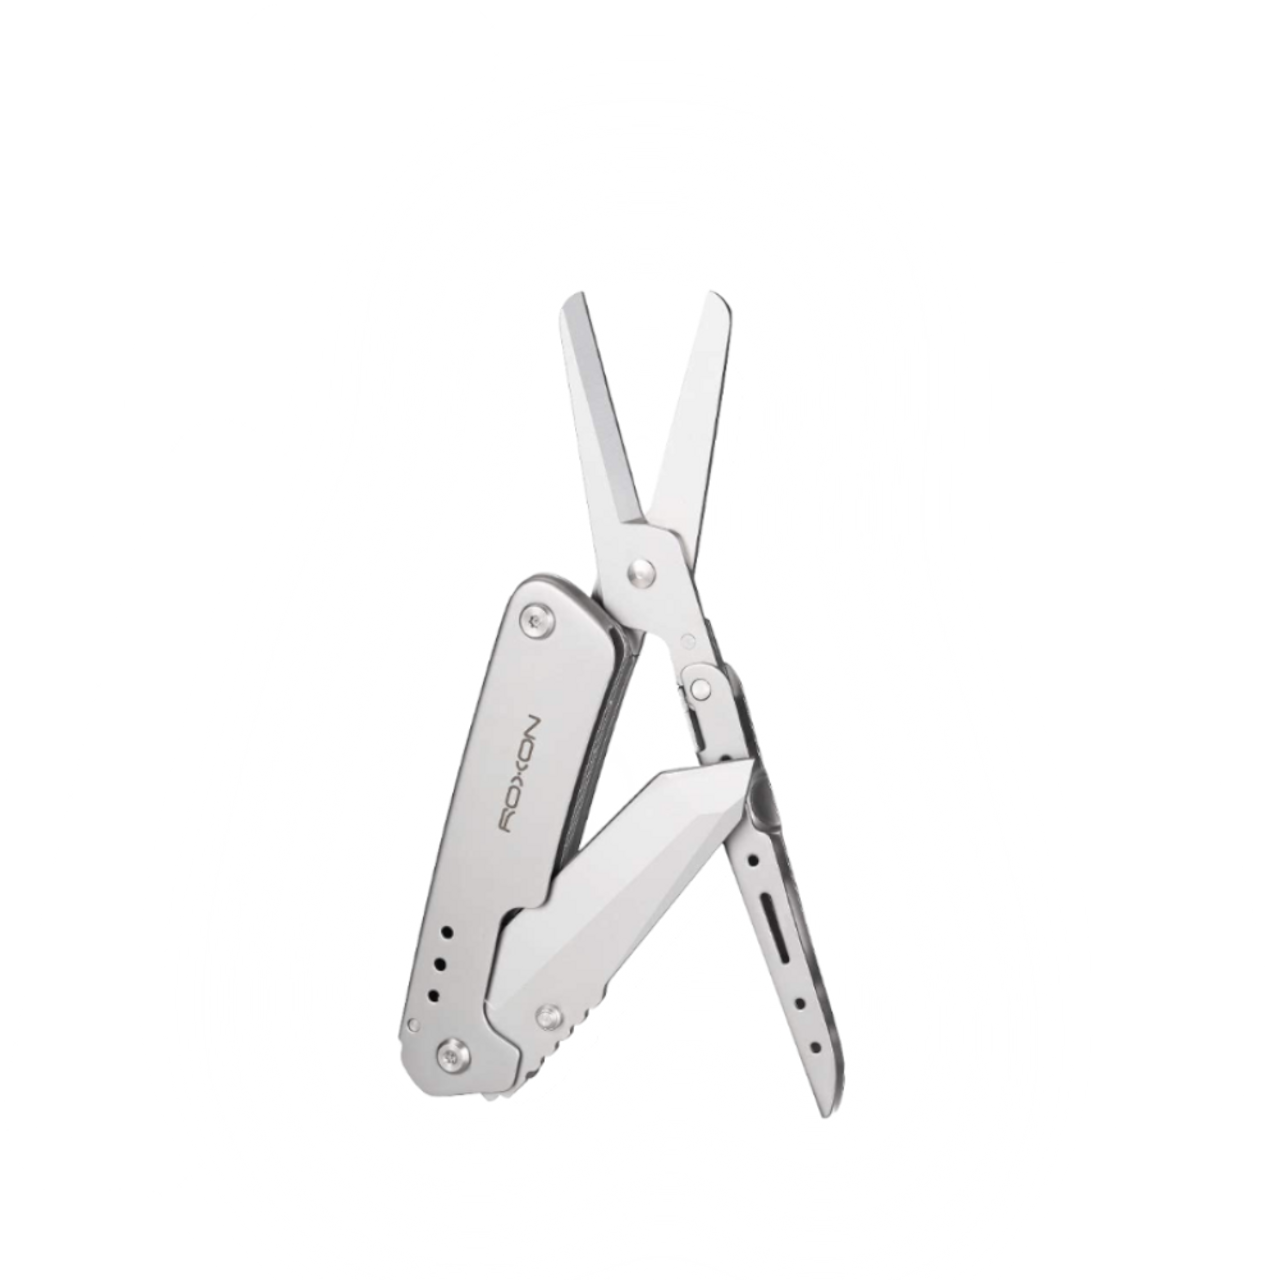 ROXON 17 in One Tools Hammer Multitool